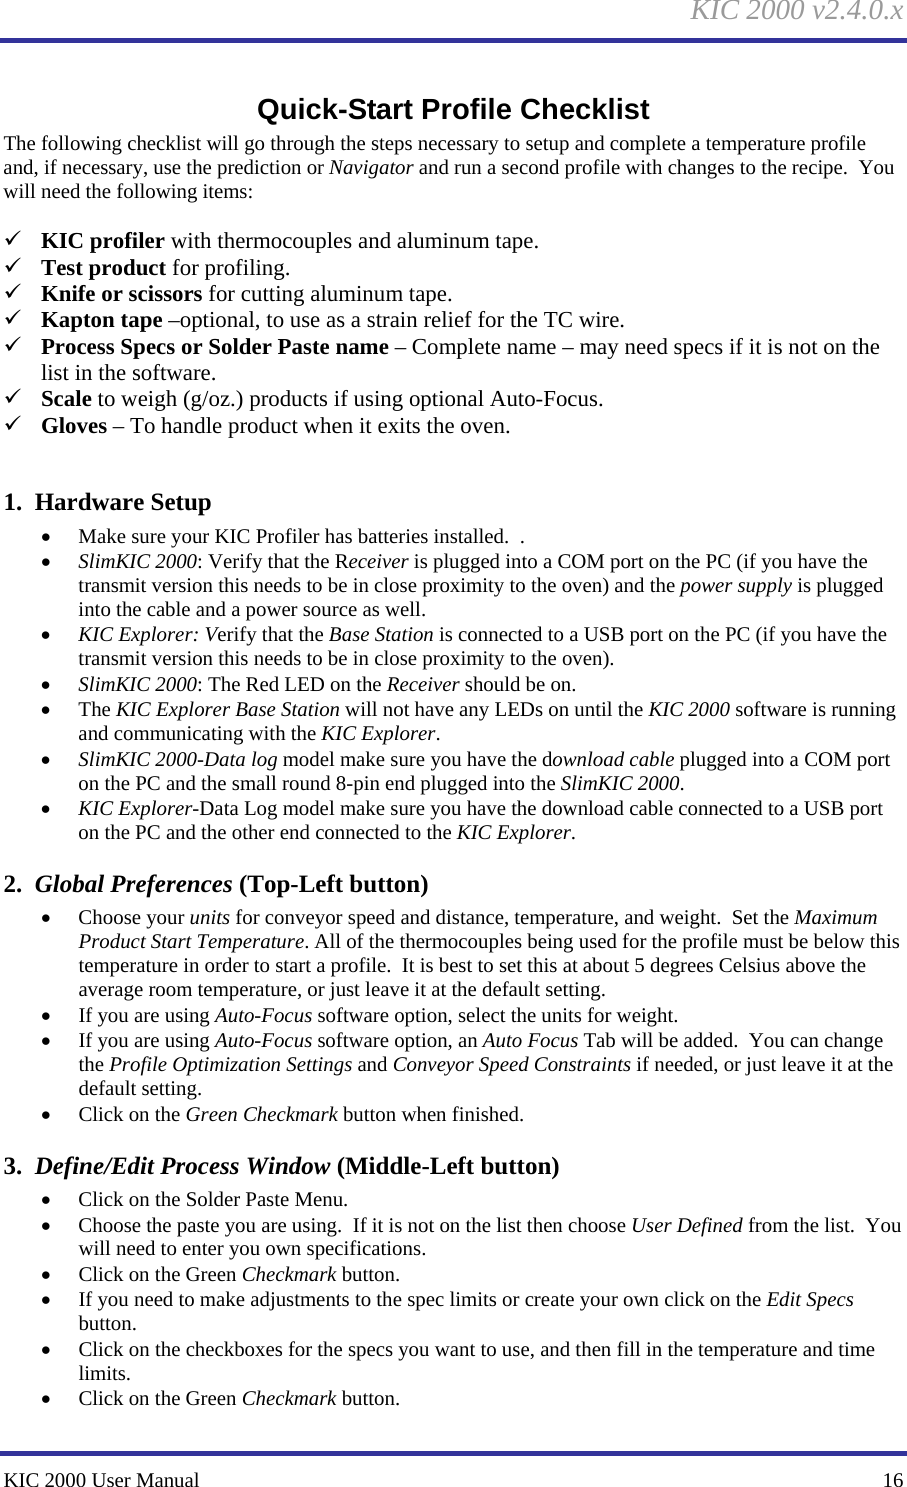     KIC 2000 v2.4.0.x KIC 2000 User Manual    16 Quick-Start Profile Checklist The following checklist will go through the steps necessary to setup and complete a temperature profile and, if necessary, use the prediction or Navigator and run a second profile with changes to the recipe.  You will need the following items:  9 KIC profiler with thermocouples and aluminum tape. 9 Test product for profiling. 9 Knife or scissors for cutting aluminum tape. 9 Kapton tape –optional, to use as a strain relief for the TC wire. 9 Process Specs or Solder Paste name – Complete name – may need specs if it is not on the list in the software. 9 Scale to weigh (g/oz.) products if using optional Auto-Focus.   9 Gloves – To handle product when it exits the oven.  1.  Hardware Setup • Make sure your KIC Profiler has batteries installed.  . • SlimKIC 2000: Verify that the Receiver is plugged into a COM port on the PC (if you have the transmit version this needs to be in close proximity to the oven) and the power supply is plugged into the cable and a power source as well. • KIC Explorer: Verify that the Base Station is connected to a USB port on the PC (if you have the transmit version this needs to be in close proximity to the oven).  • SlimKIC 2000: The Red LED on the Receiver should be on. • The KIC Explorer Base Station will not have any LEDs on until the KIC 2000 software is running and communicating with the KIC Explorer.   • SlimKIC 2000-Data log model make sure you have the download cable plugged into a COM port on the PC and the small round 8-pin end plugged into the SlimKIC 2000. • KIC Explorer-Data Log model make sure you have the download cable connected to a USB port on the PC and the other end connected to the KIC Explorer.   2.  Global Preferences (Top-Left button) • Choose your units for conveyor speed and distance, temperature, and weight.  Set the Maximum Product Start Temperature. All of the thermocouples being used for the profile must be below this temperature in order to start a profile.  It is best to set this at about 5 degrees Celsius above the average room temperature, or just leave it at the default setting. • If you are using Auto-Focus software option, select the units for weight. • If you are using Auto-Focus software option, an Auto Focus Tab will be added.  You can change the Profile Optimization Settings and Conveyor Speed Constraints if needed, or just leave it at the default setting. • Click on the Green Checkmark button when finished. 3.  Define/Edit Process Window (Middle-Left button) • Click on the Solder Paste Menu. • Choose the paste you are using.  If it is not on the list then choose User Defined from the list.  You will need to enter you own specifications. • Click on the Green Checkmark button. • If you need to make adjustments to the spec limits or create your own click on the Edit Specs button. • Click on the checkboxes for the specs you want to use, and then fill in the temperature and time limits. • Click on the Green Checkmark button. 